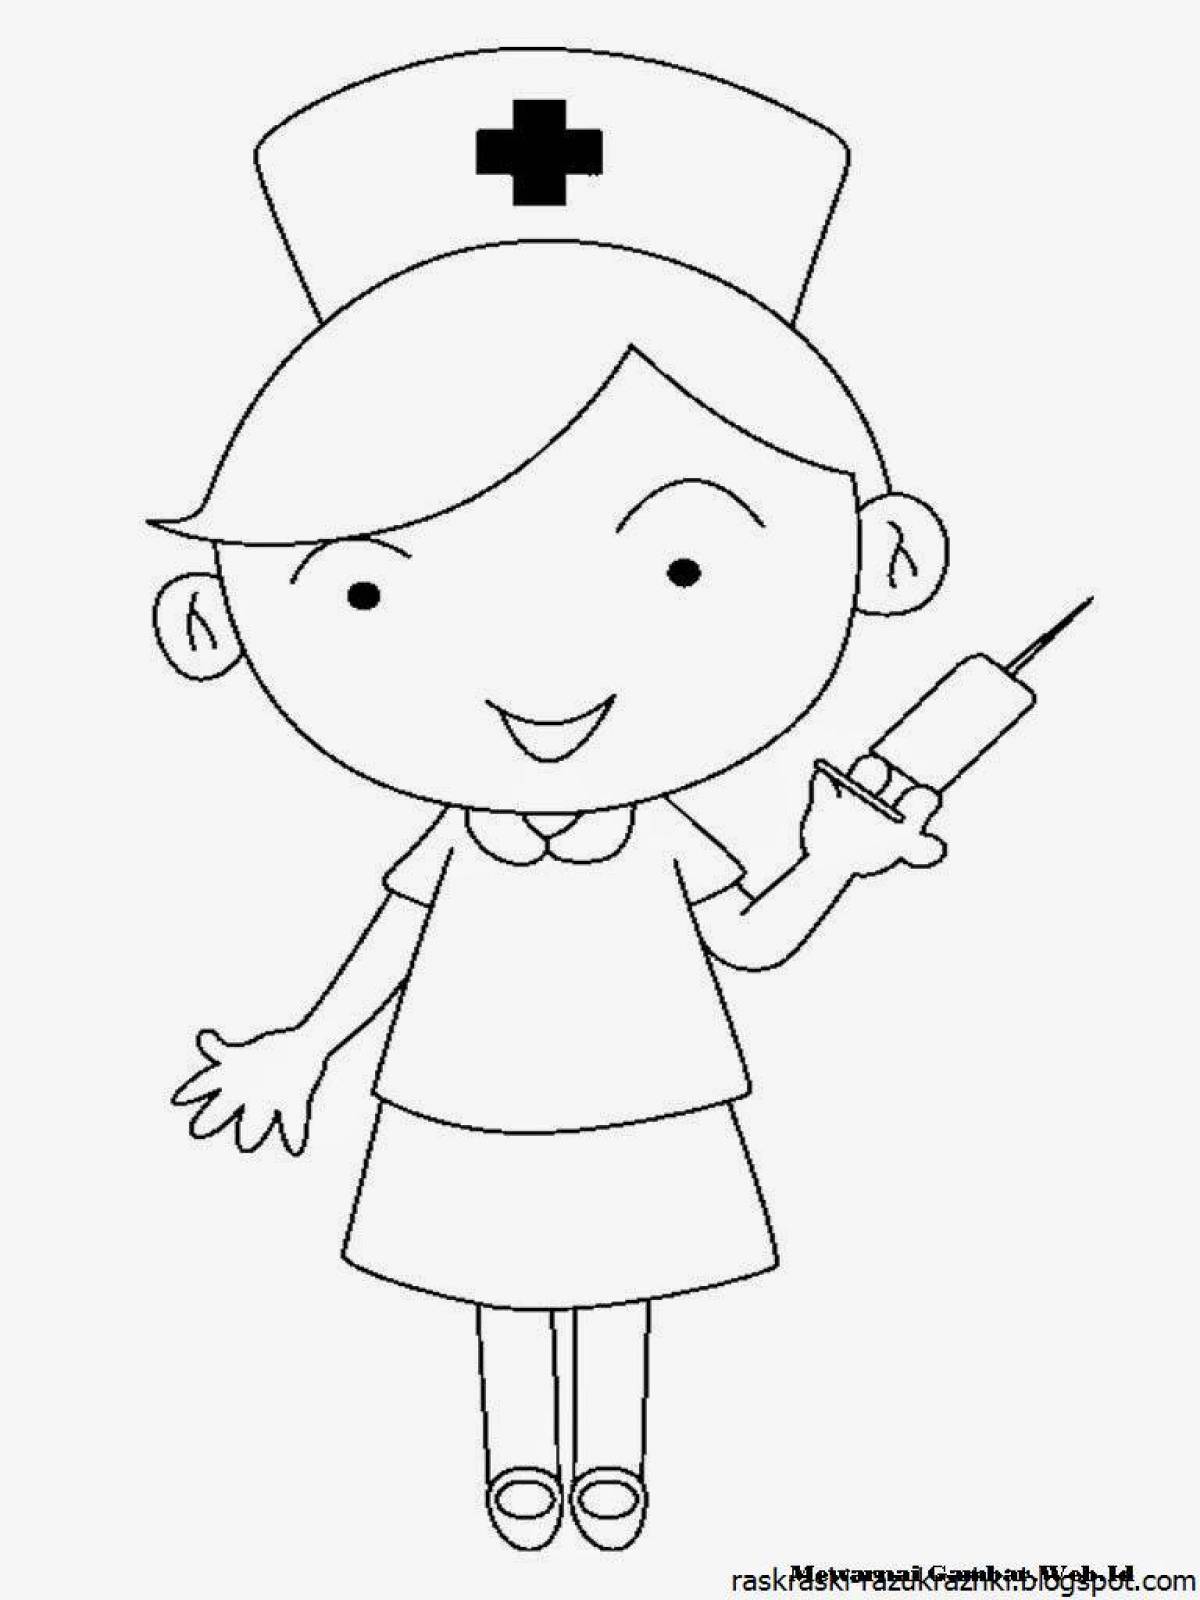 Playful doctor coloring page for kids